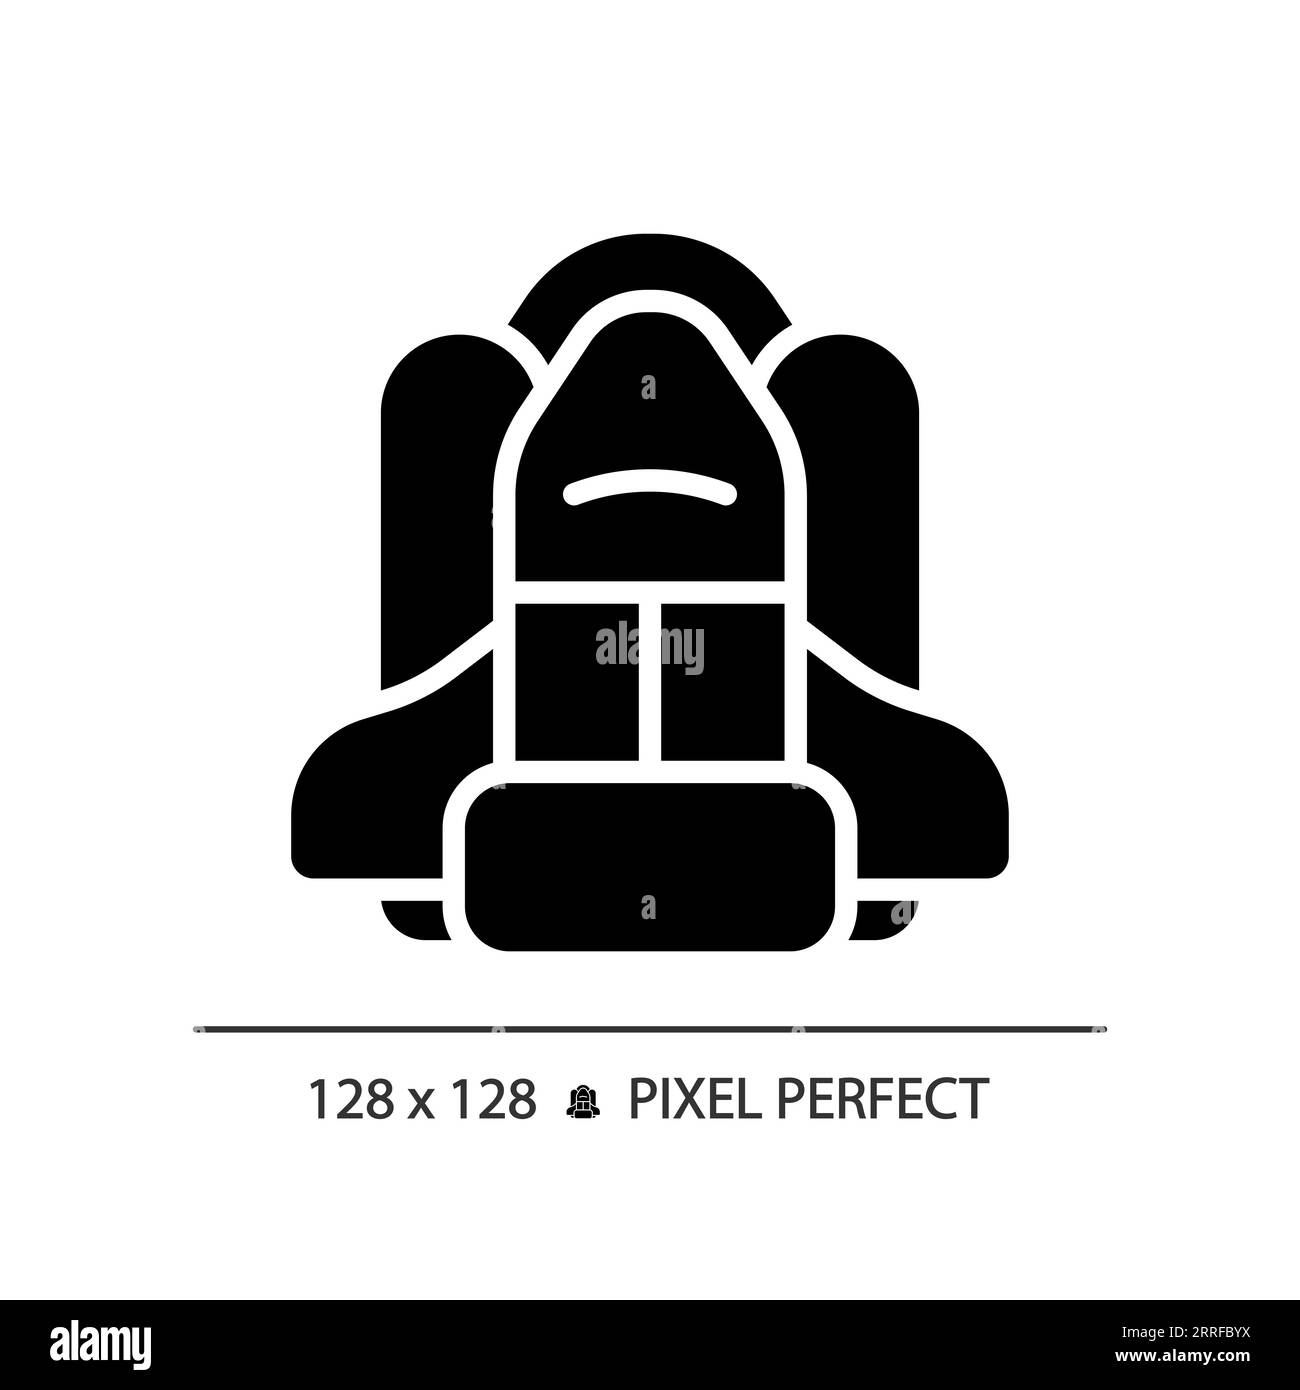 Space shuttle pixel perfect black glyph icon Stock Vector